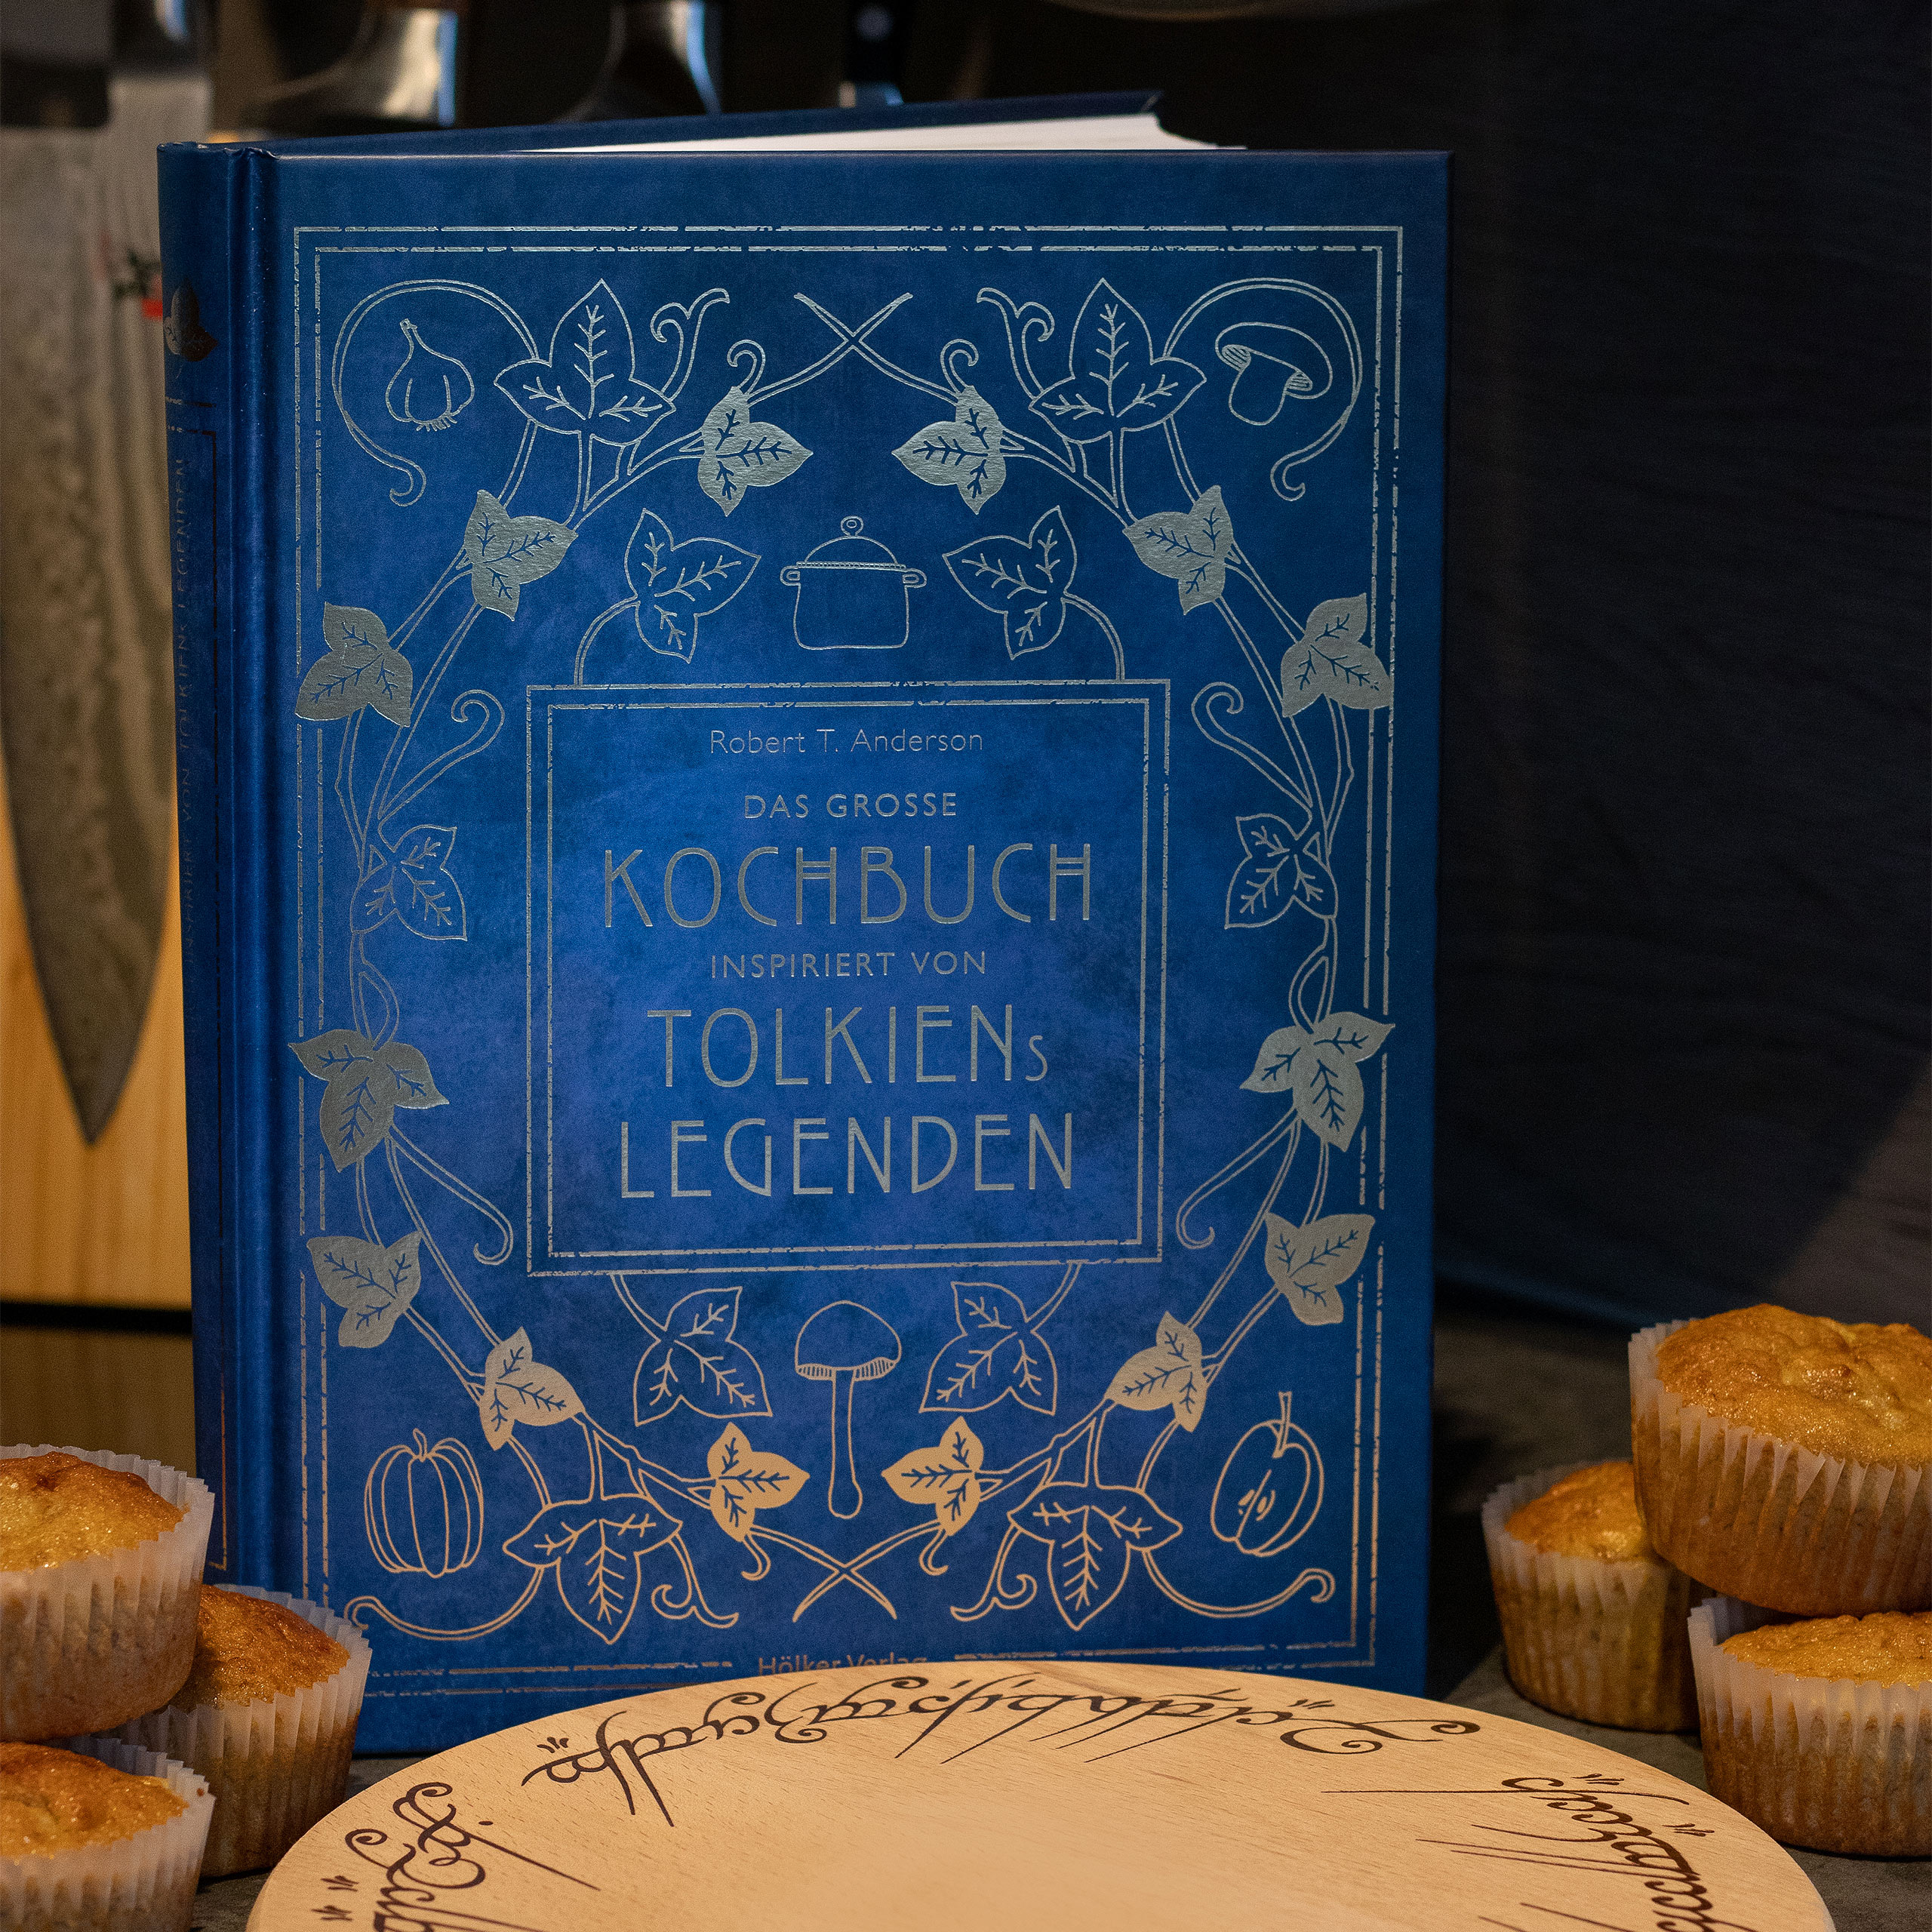 The Great Cookbook Inspired by Tolkien's Legends